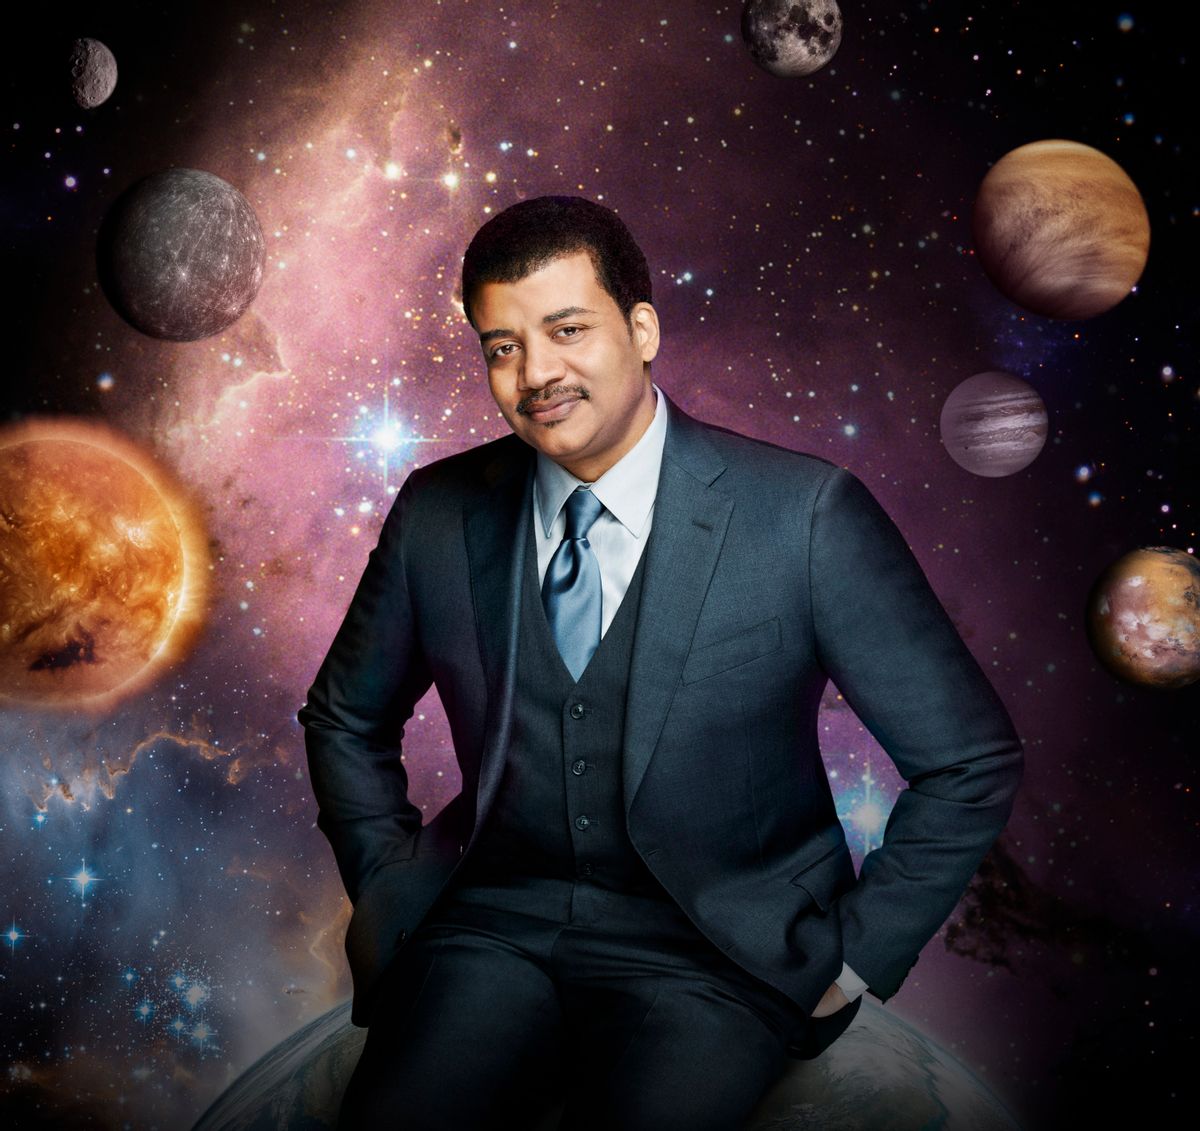 This photo released by Fox shows Neil deGrasse Tyson, the astrophysicist who hosts the television show, "Cosmos: A Spacetime Odyssey," premiering Sunday, March 9, 2014, 9:00-10:00 PM ET/PT on Fox and simultaneously across multiple U.S. Fox networks. The series will explore how we discovered the laws of nature and found our coordinates in space and time.  (AP Photo/Fox, Patrick Eccelsine)     (AP)